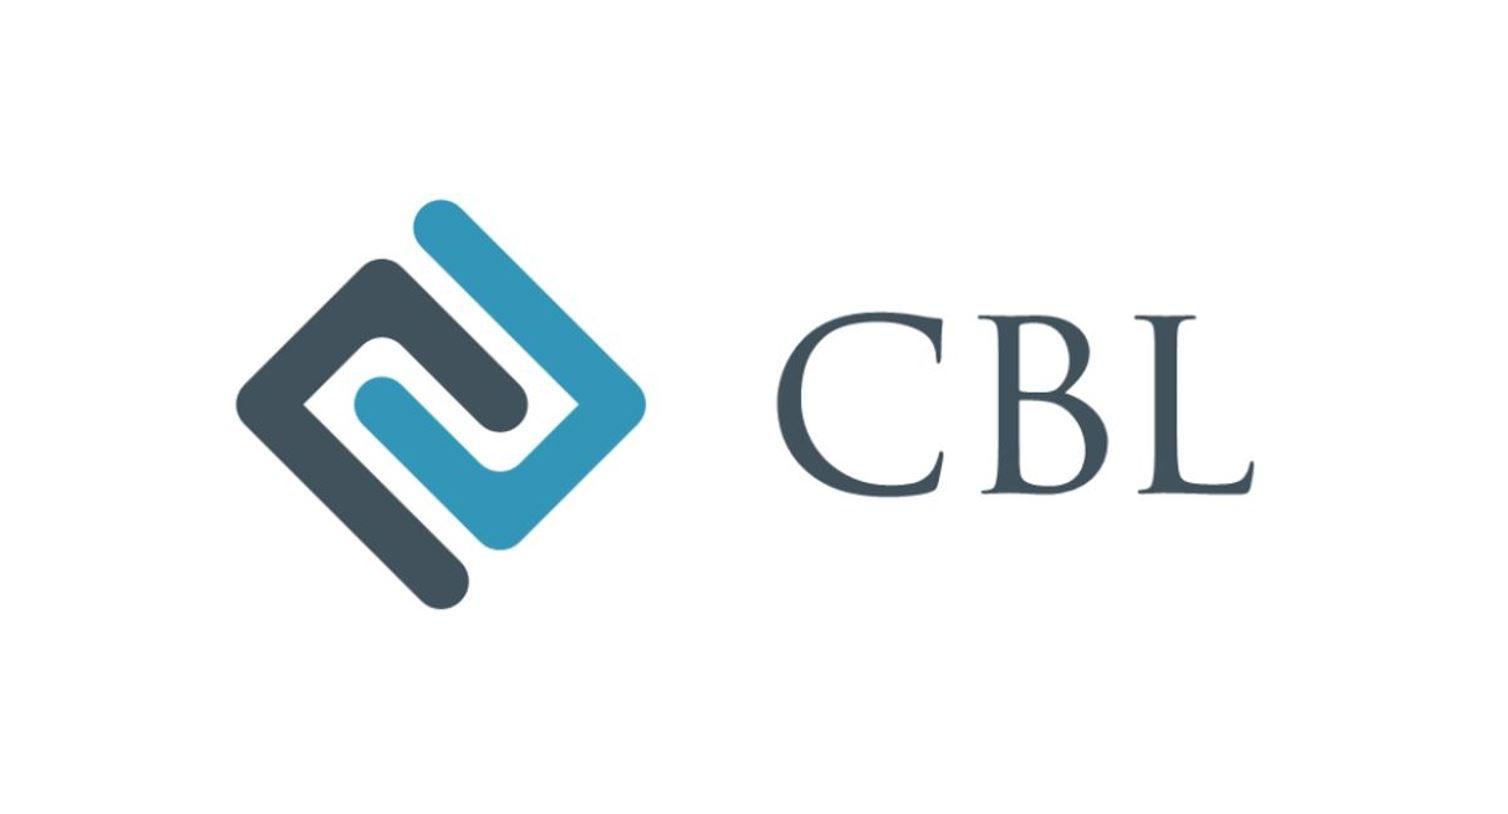 CBL Logo - Independent review finds the RBNZ had concerns about CBL Insurance's